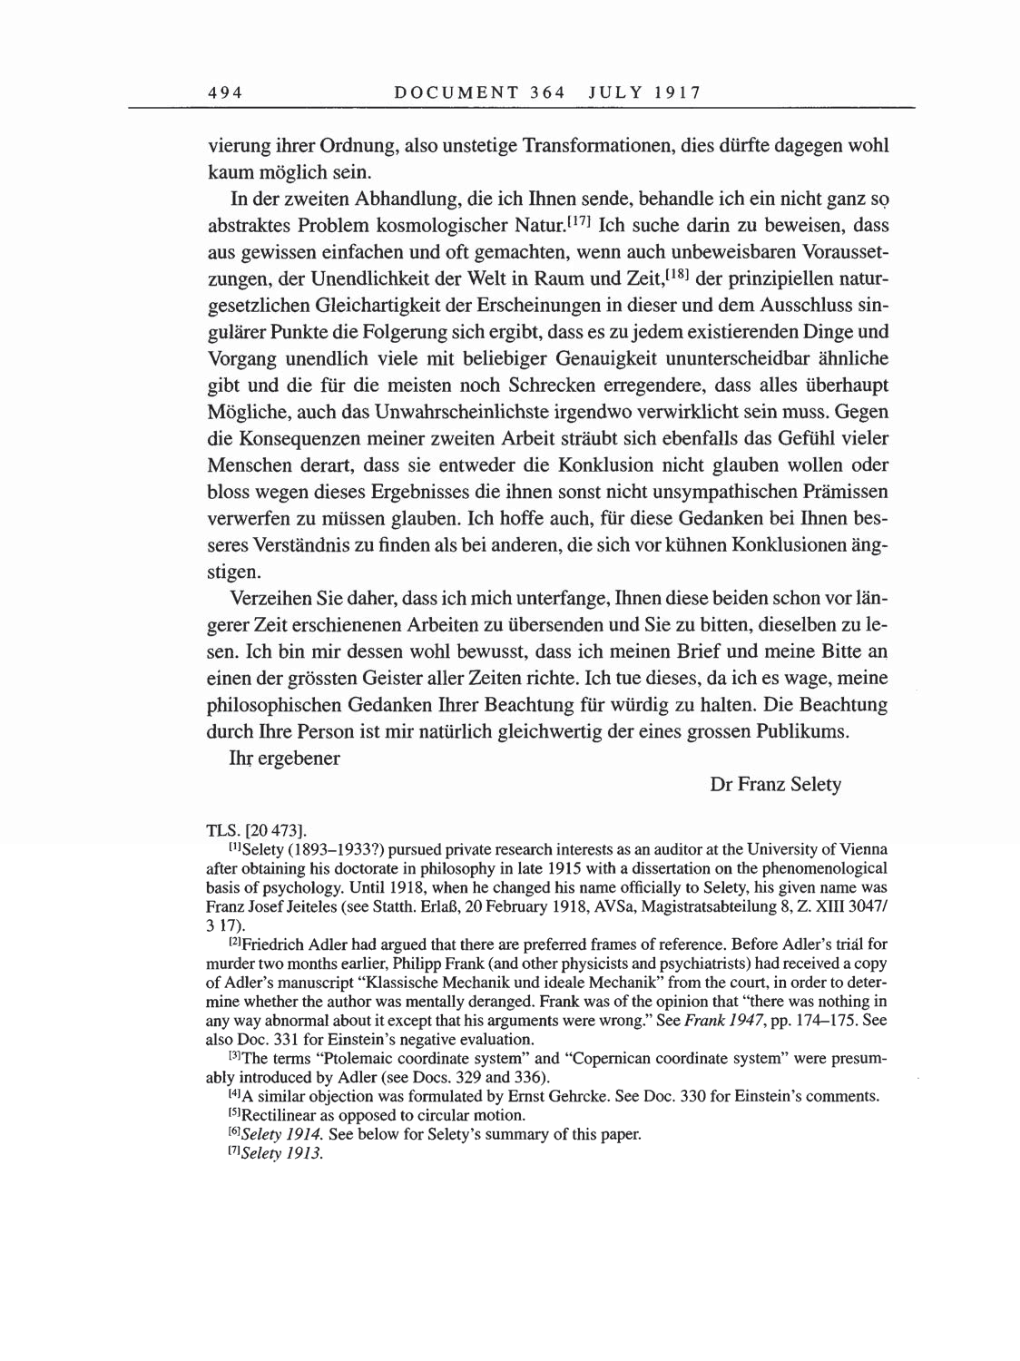 Volume 8, Part A: The Berlin Years: Correspondence 1914-1917 page 494